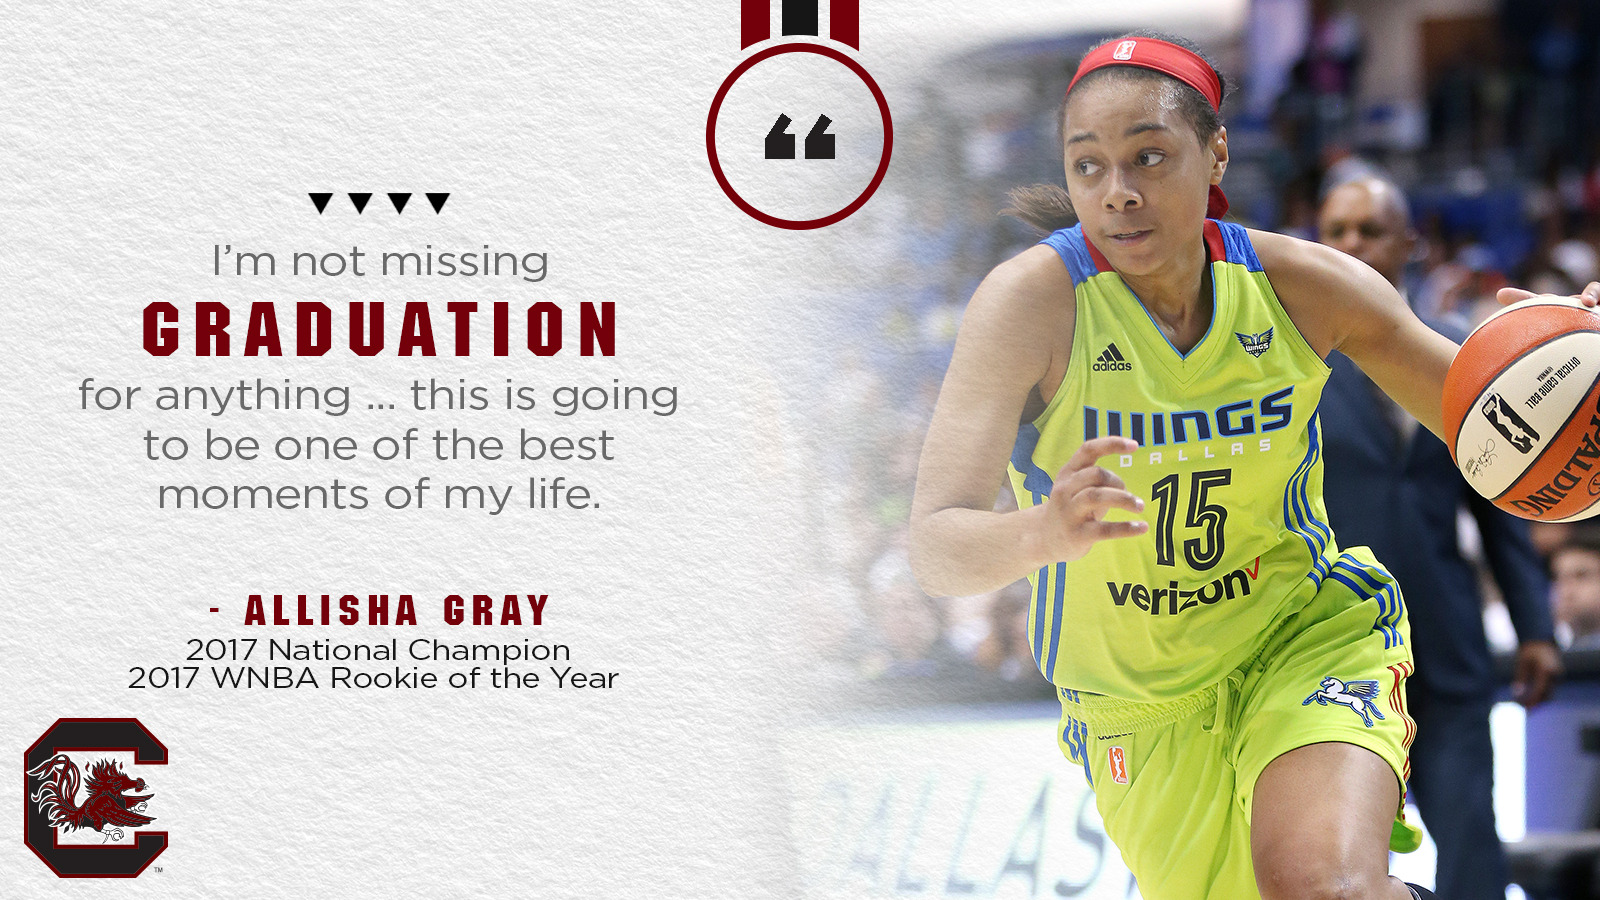 Allisha Gray is Excited to Finish What She Started